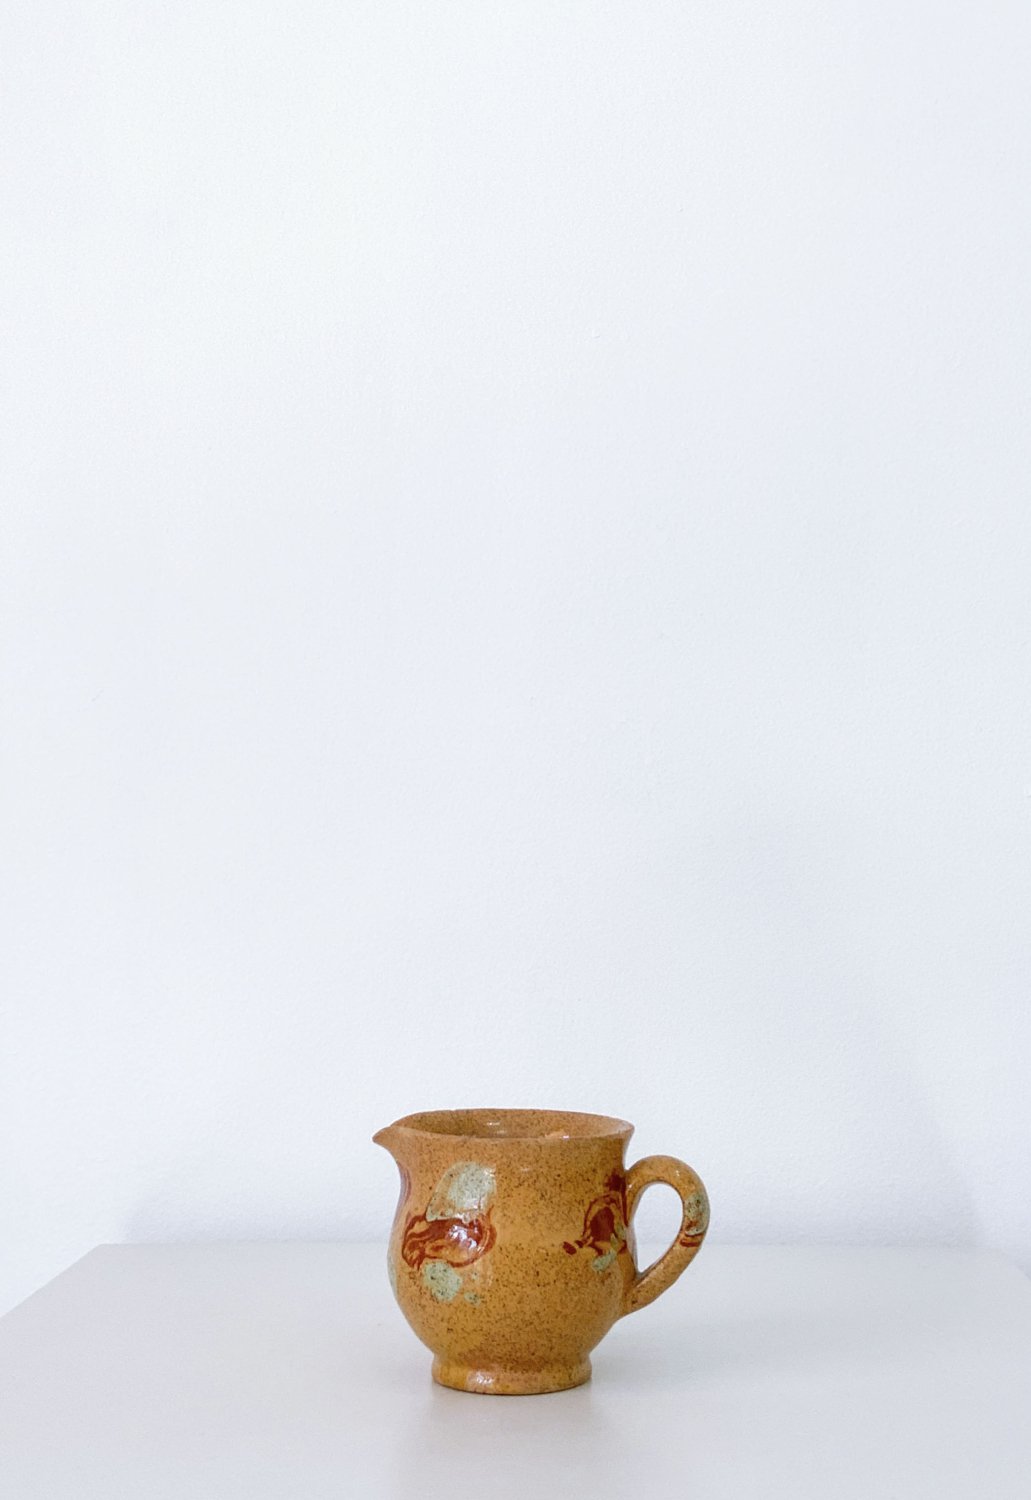 SMALL ANTIQUE PITCHER